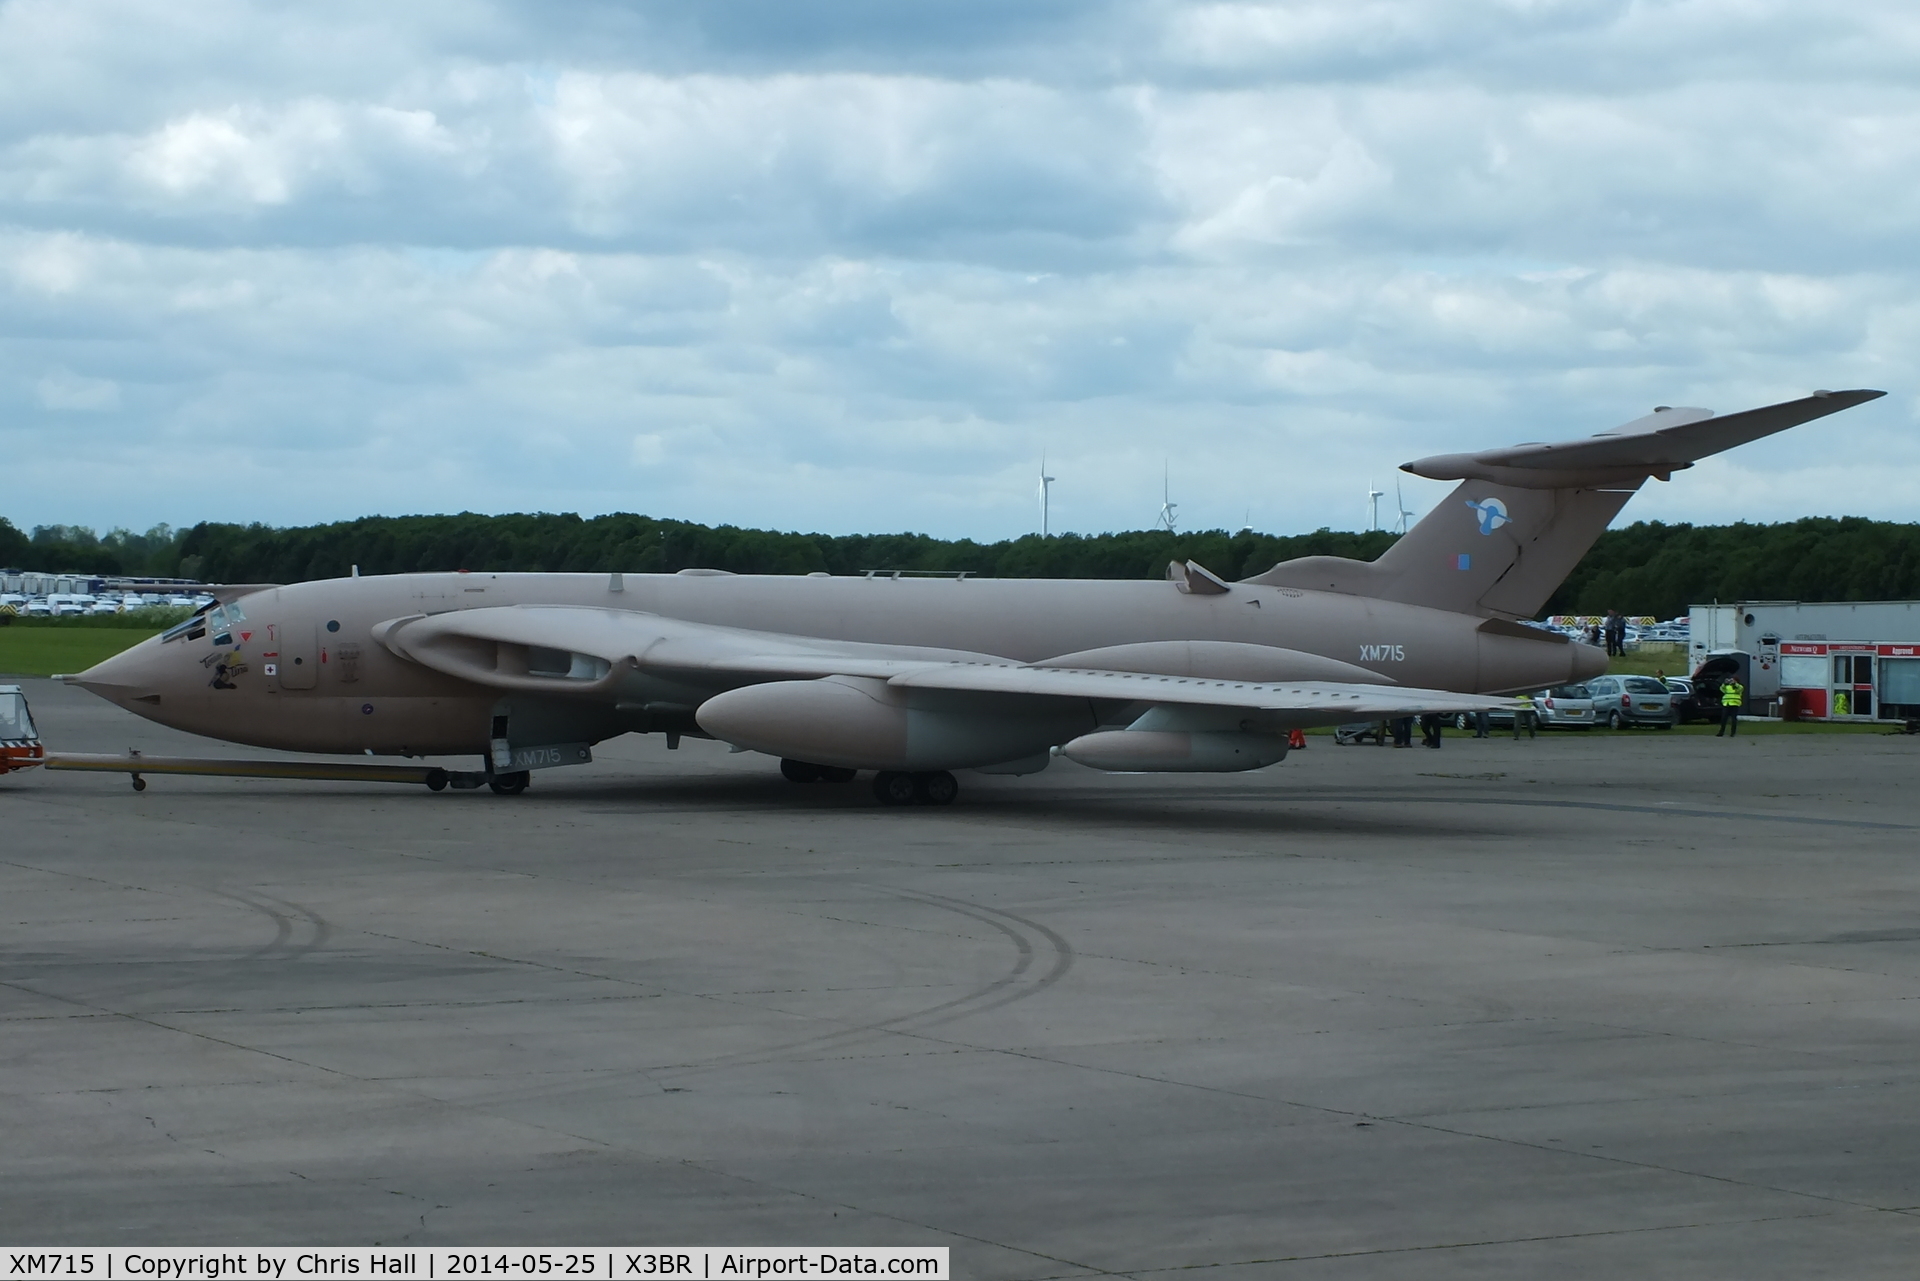 XM715, 1963 Handley Page Victor K.2 C/N HP80/83, lining up on the runway prior to its taxy run